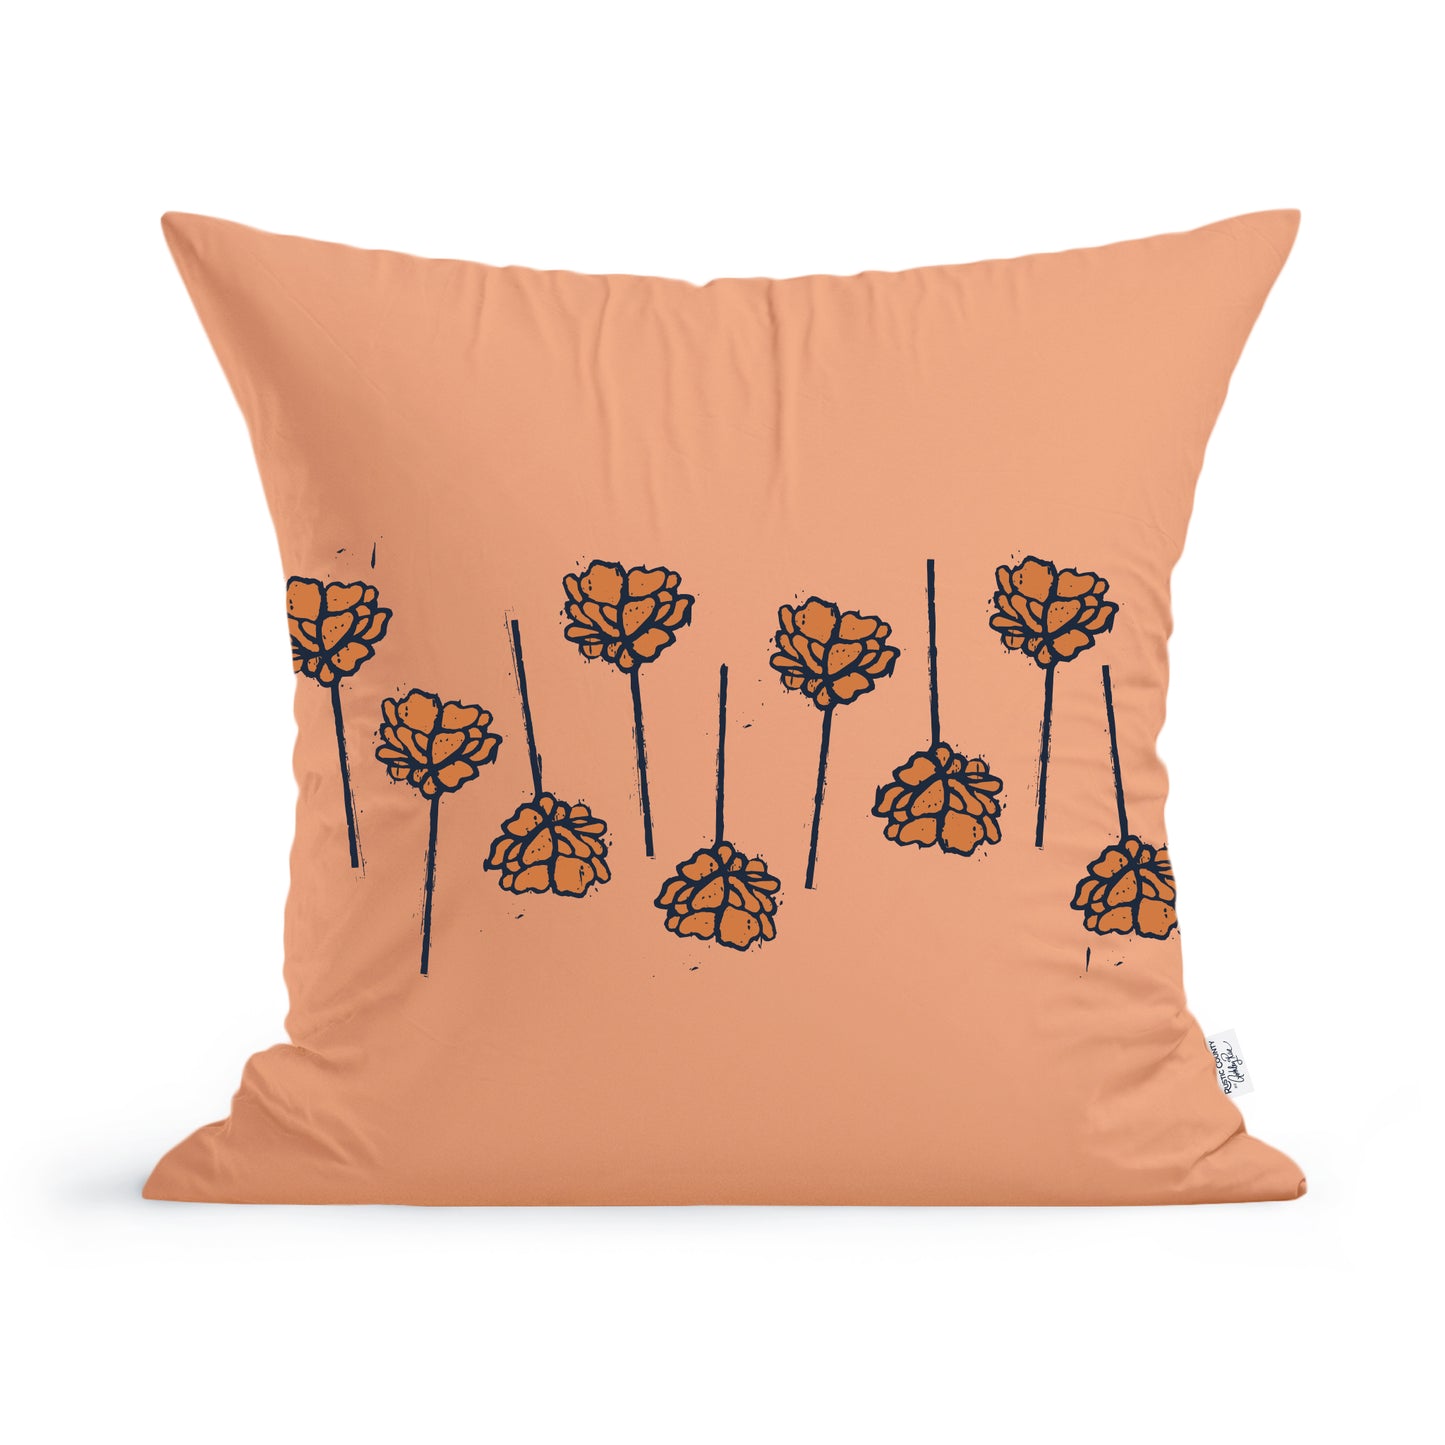 A peach-colored cotton Fresh Florals Pillow from Rustic County featuring a pattern of black line art flowers.